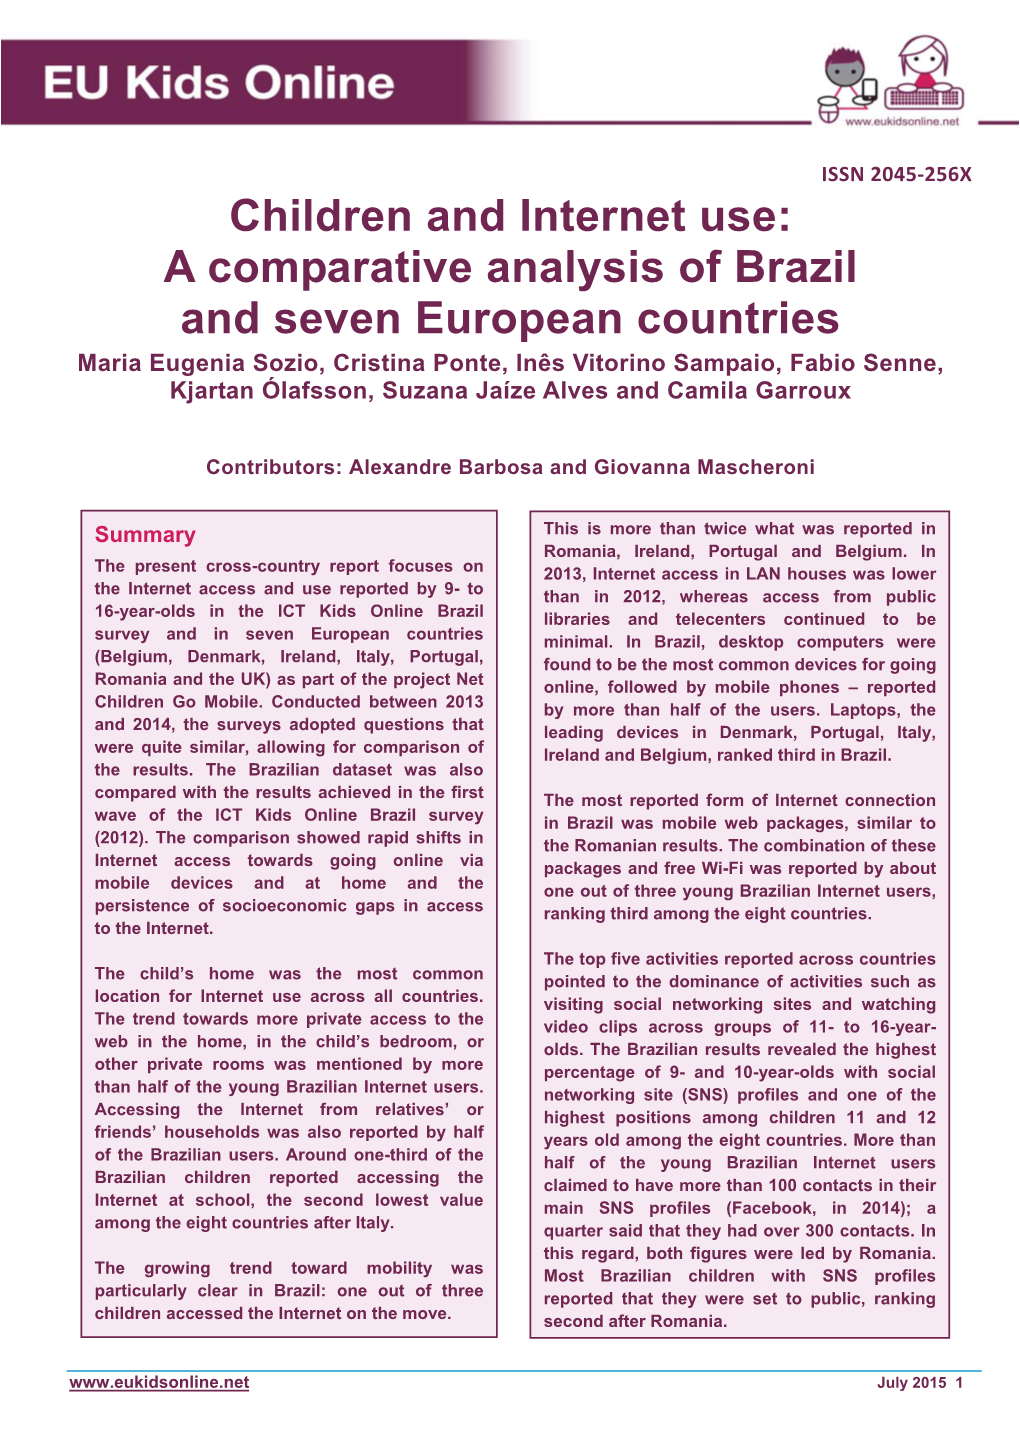 Children and Internet Use: a Comparative Analysis of Brazil and Seven European Countries